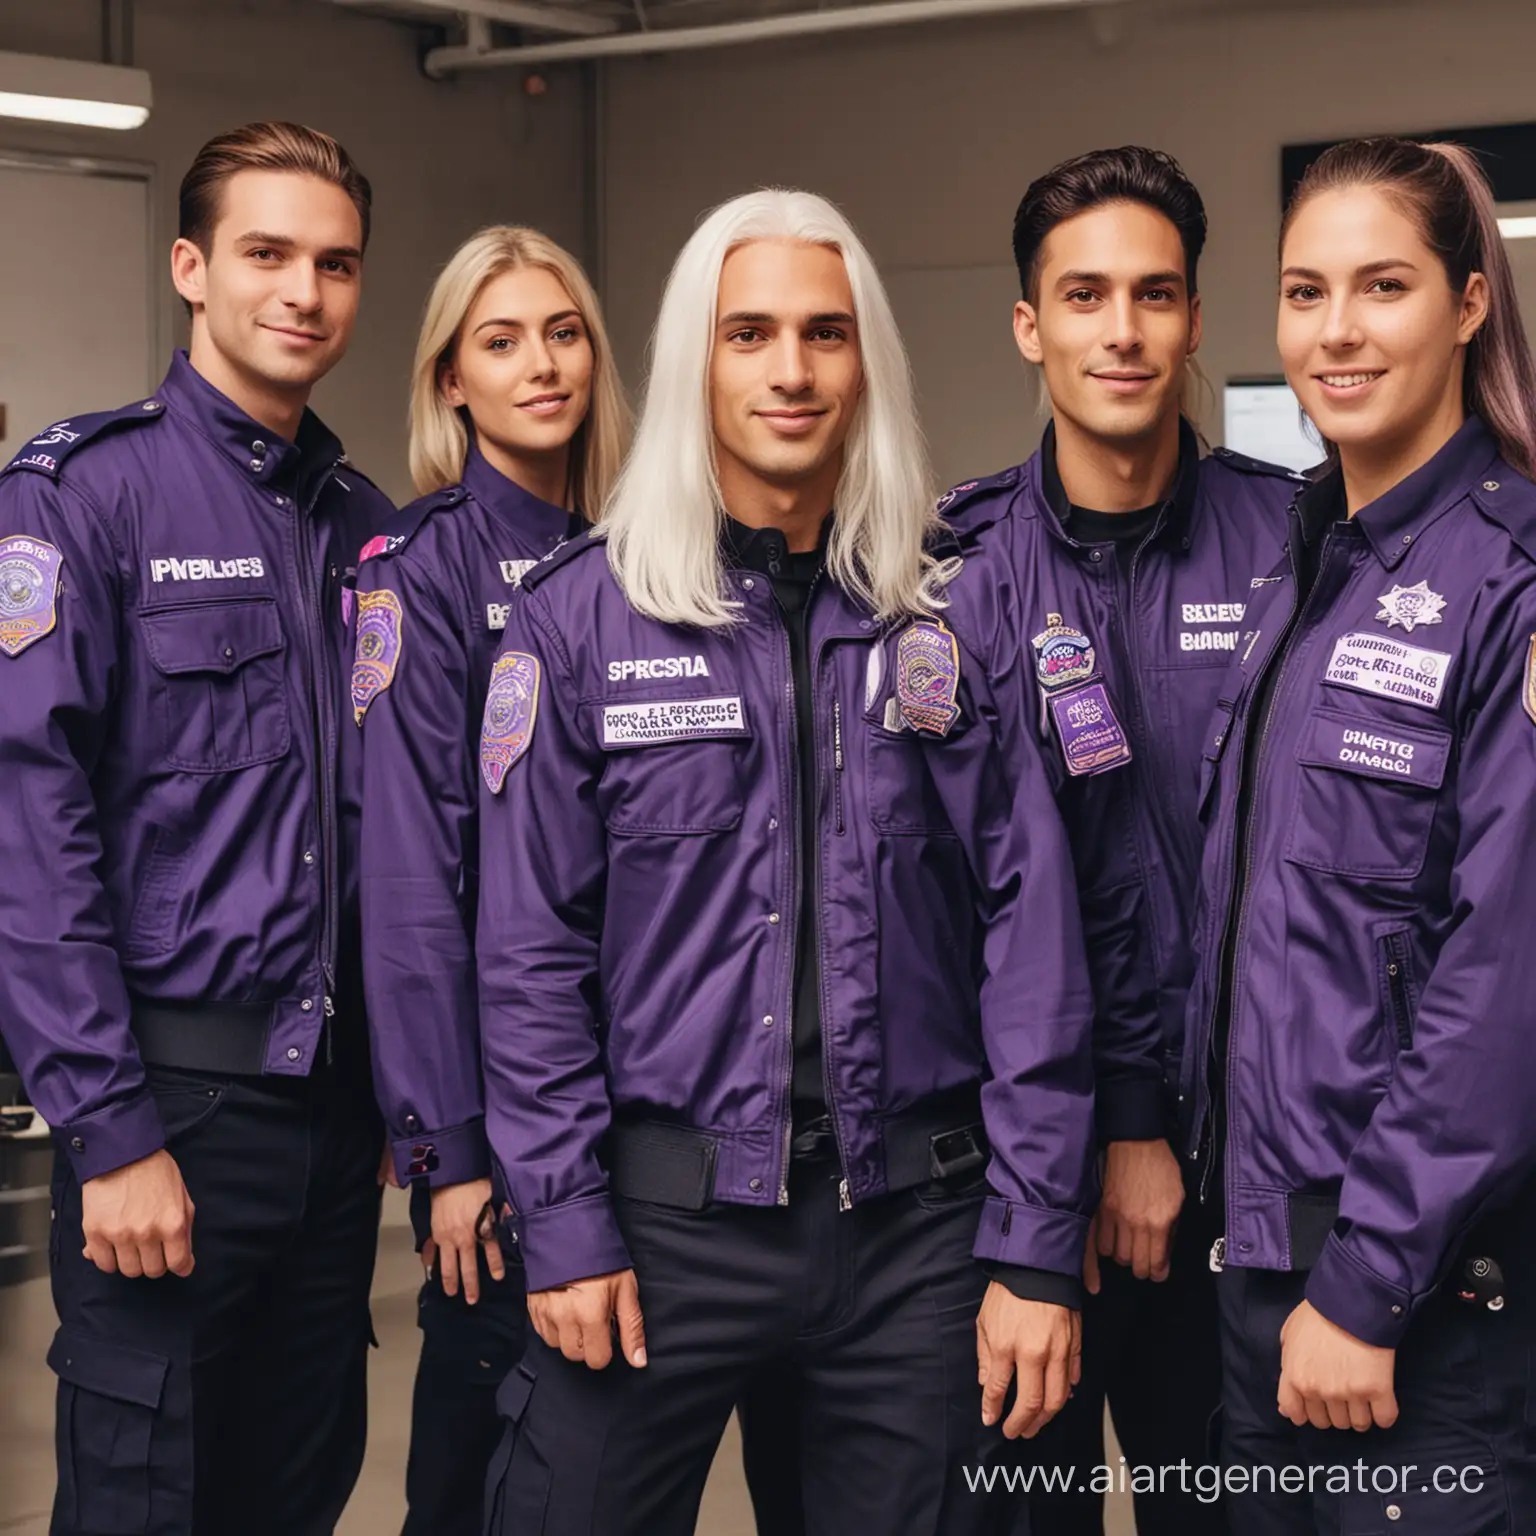 Police-Officer-Mauro-with-Colleagues-in-Purple-Neon-Style